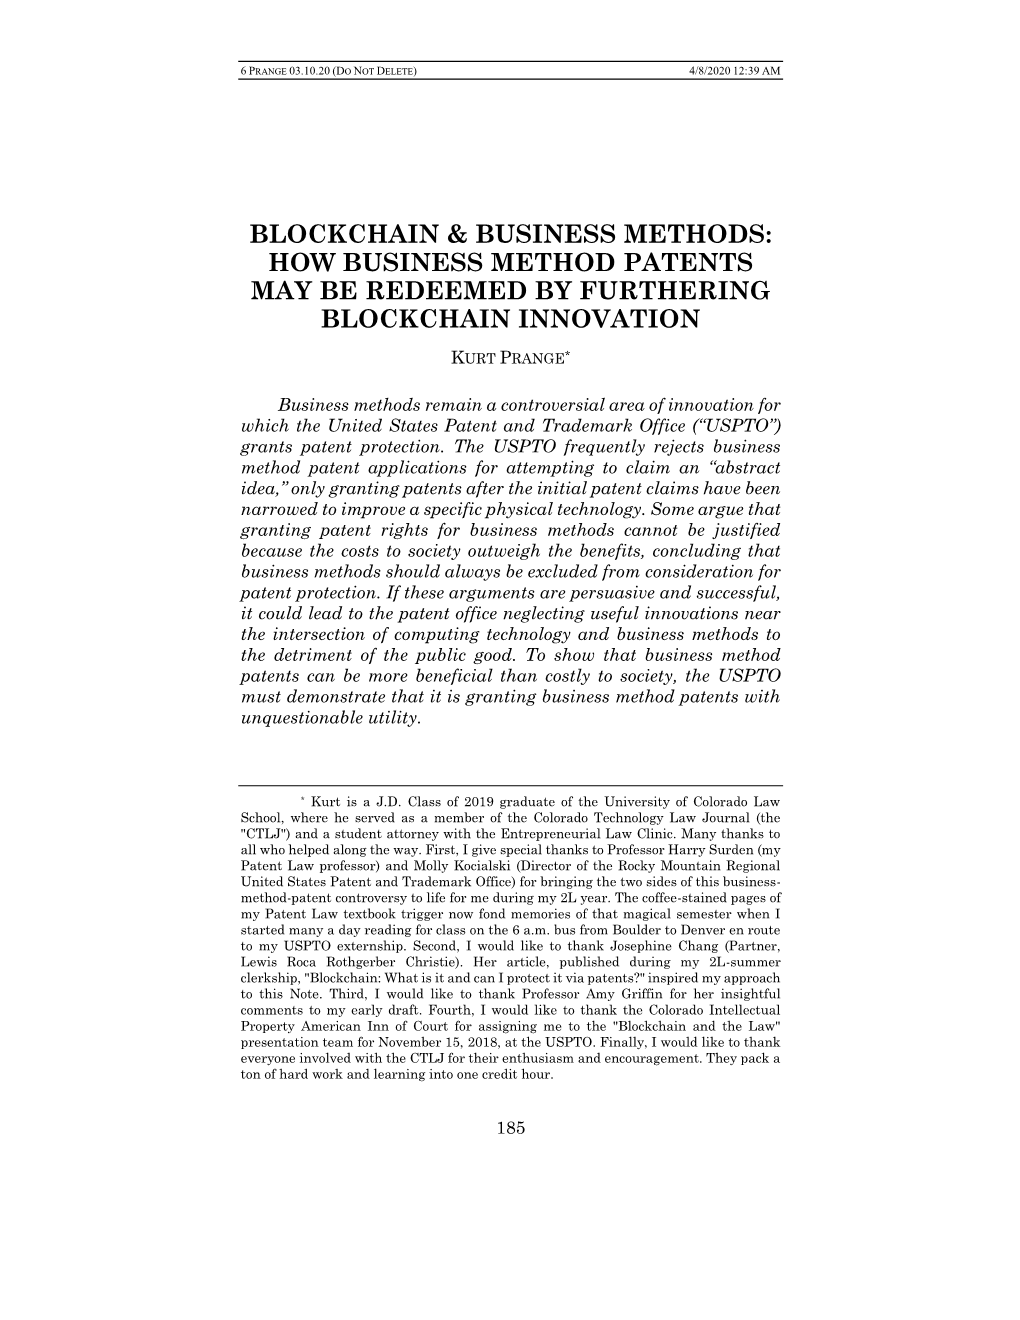 How Business Method Patents May Be Redeemed by Furthering Blockchain Innovation